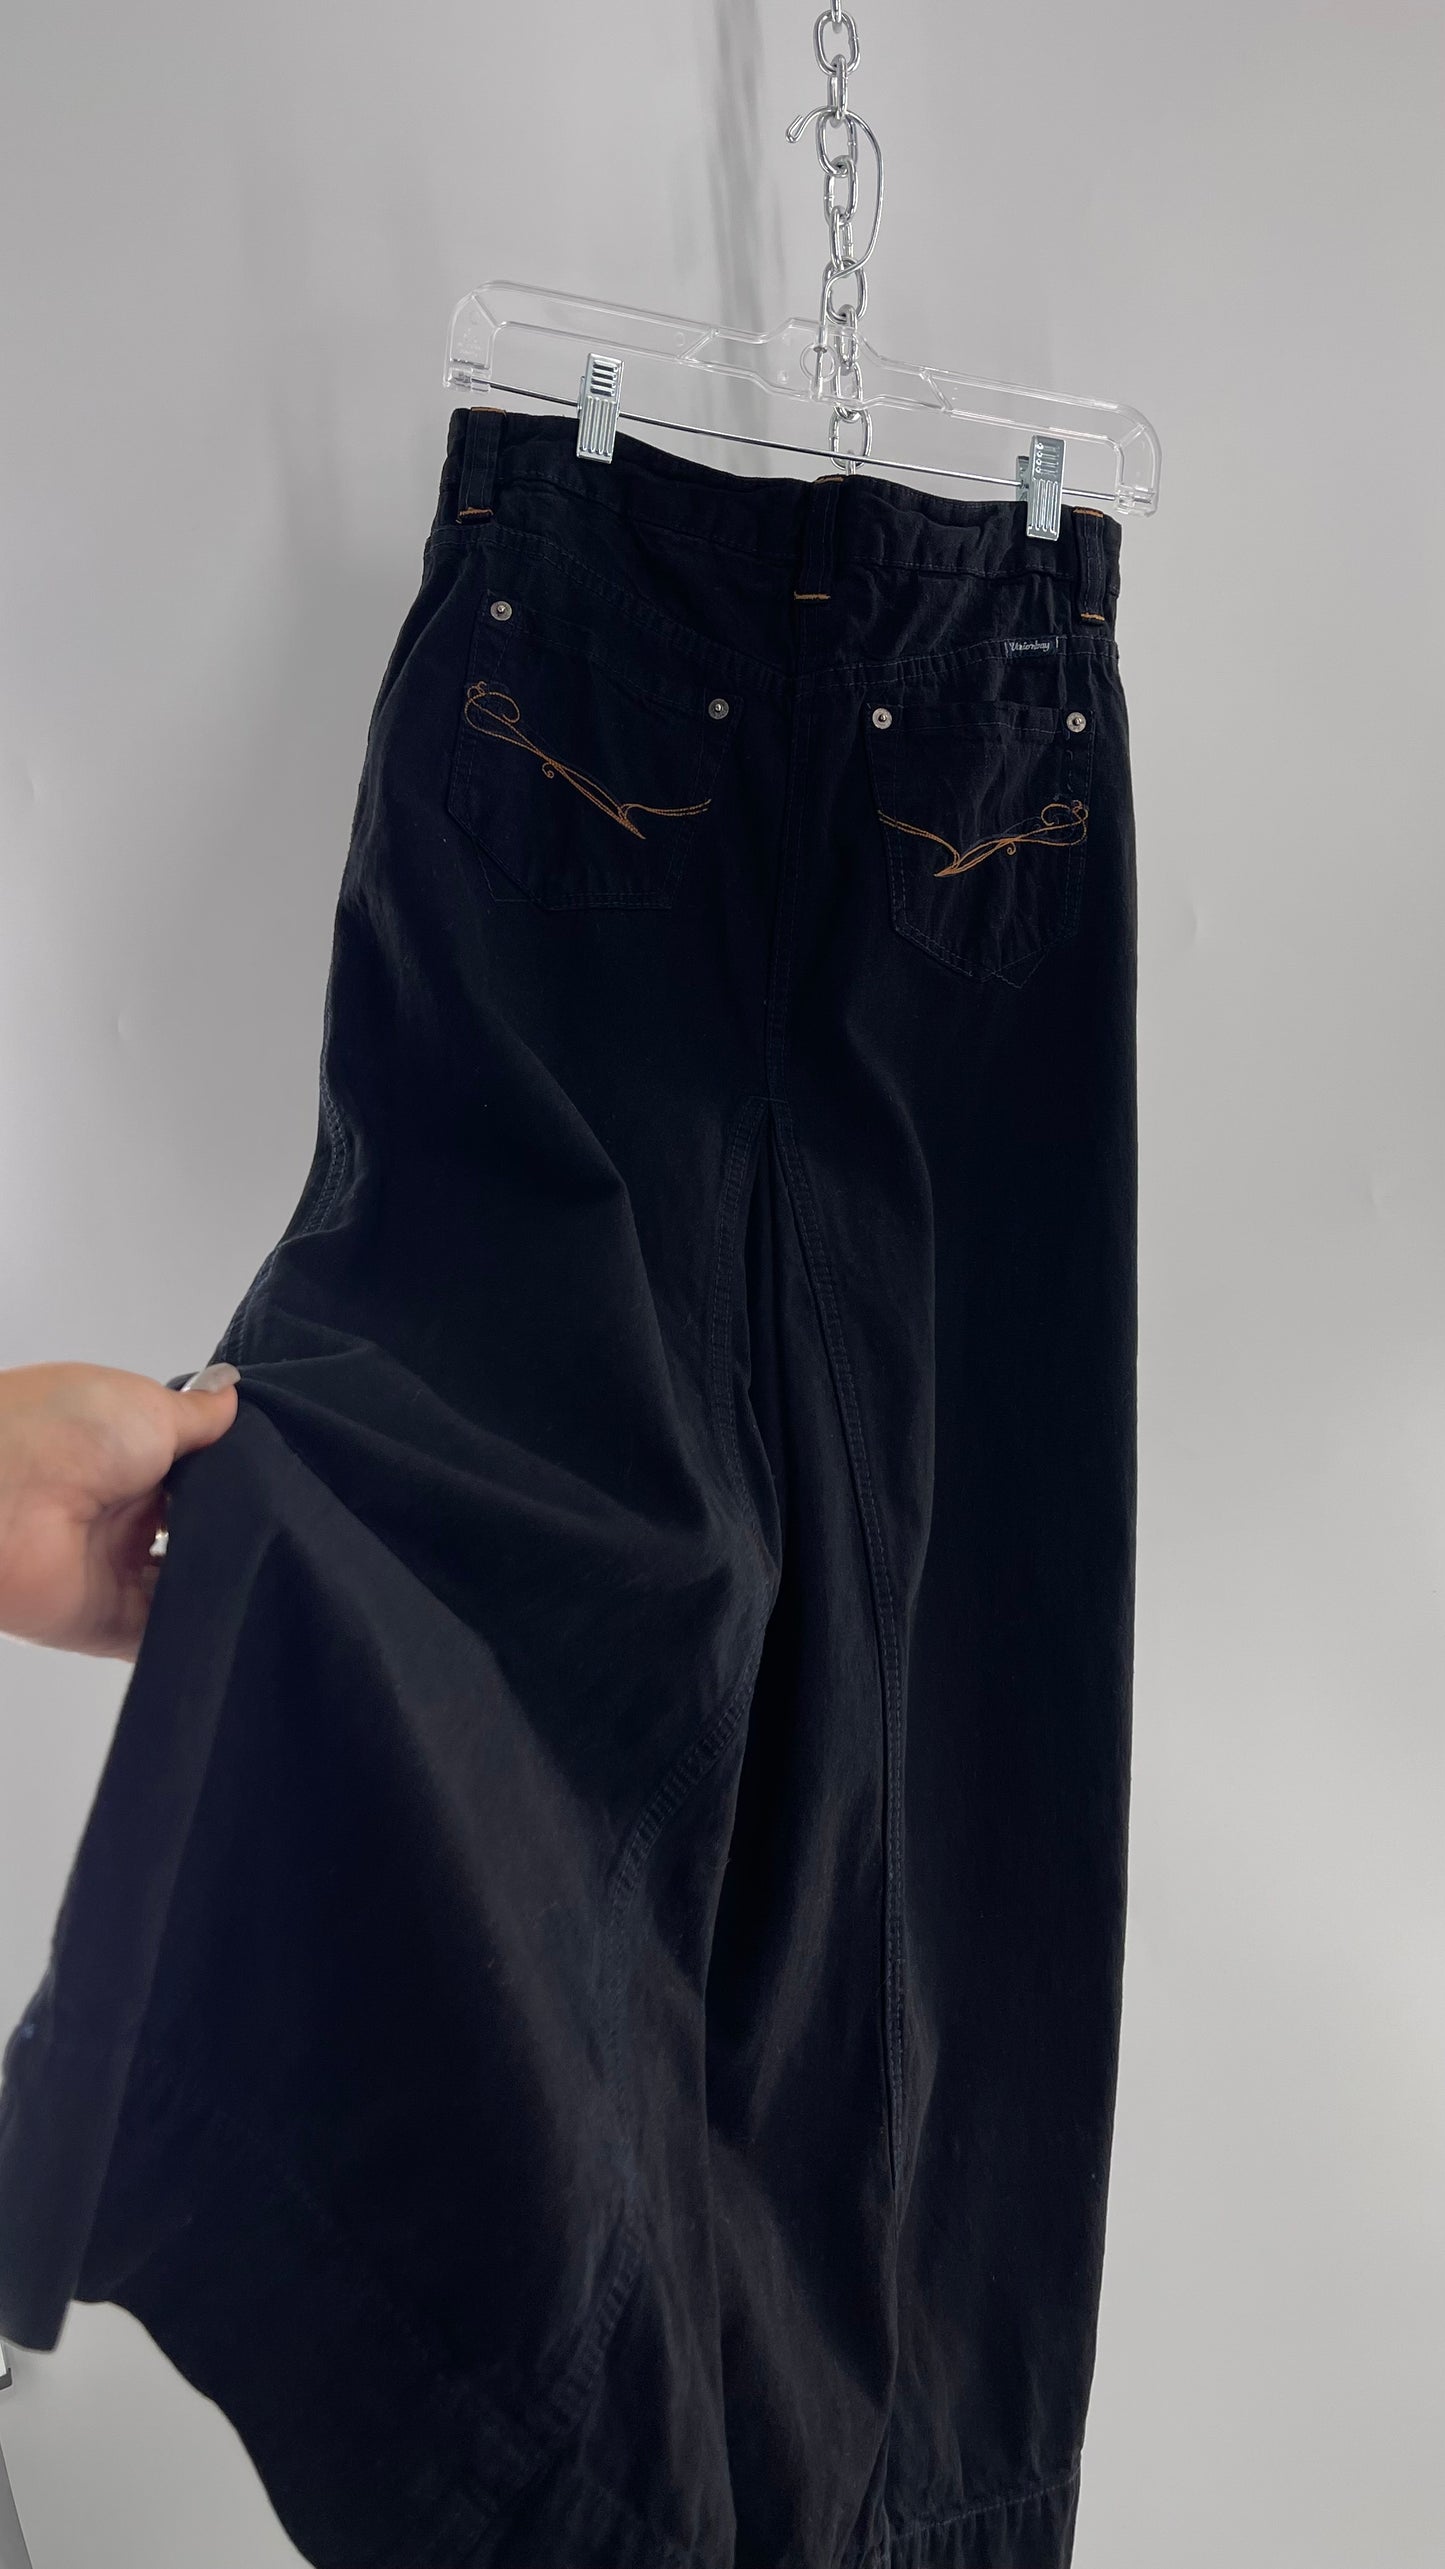 Vintage Urban Outfitters Renewal Union Bay Dark Wash Denim Full Length Skirt with Tags Attached (Small)